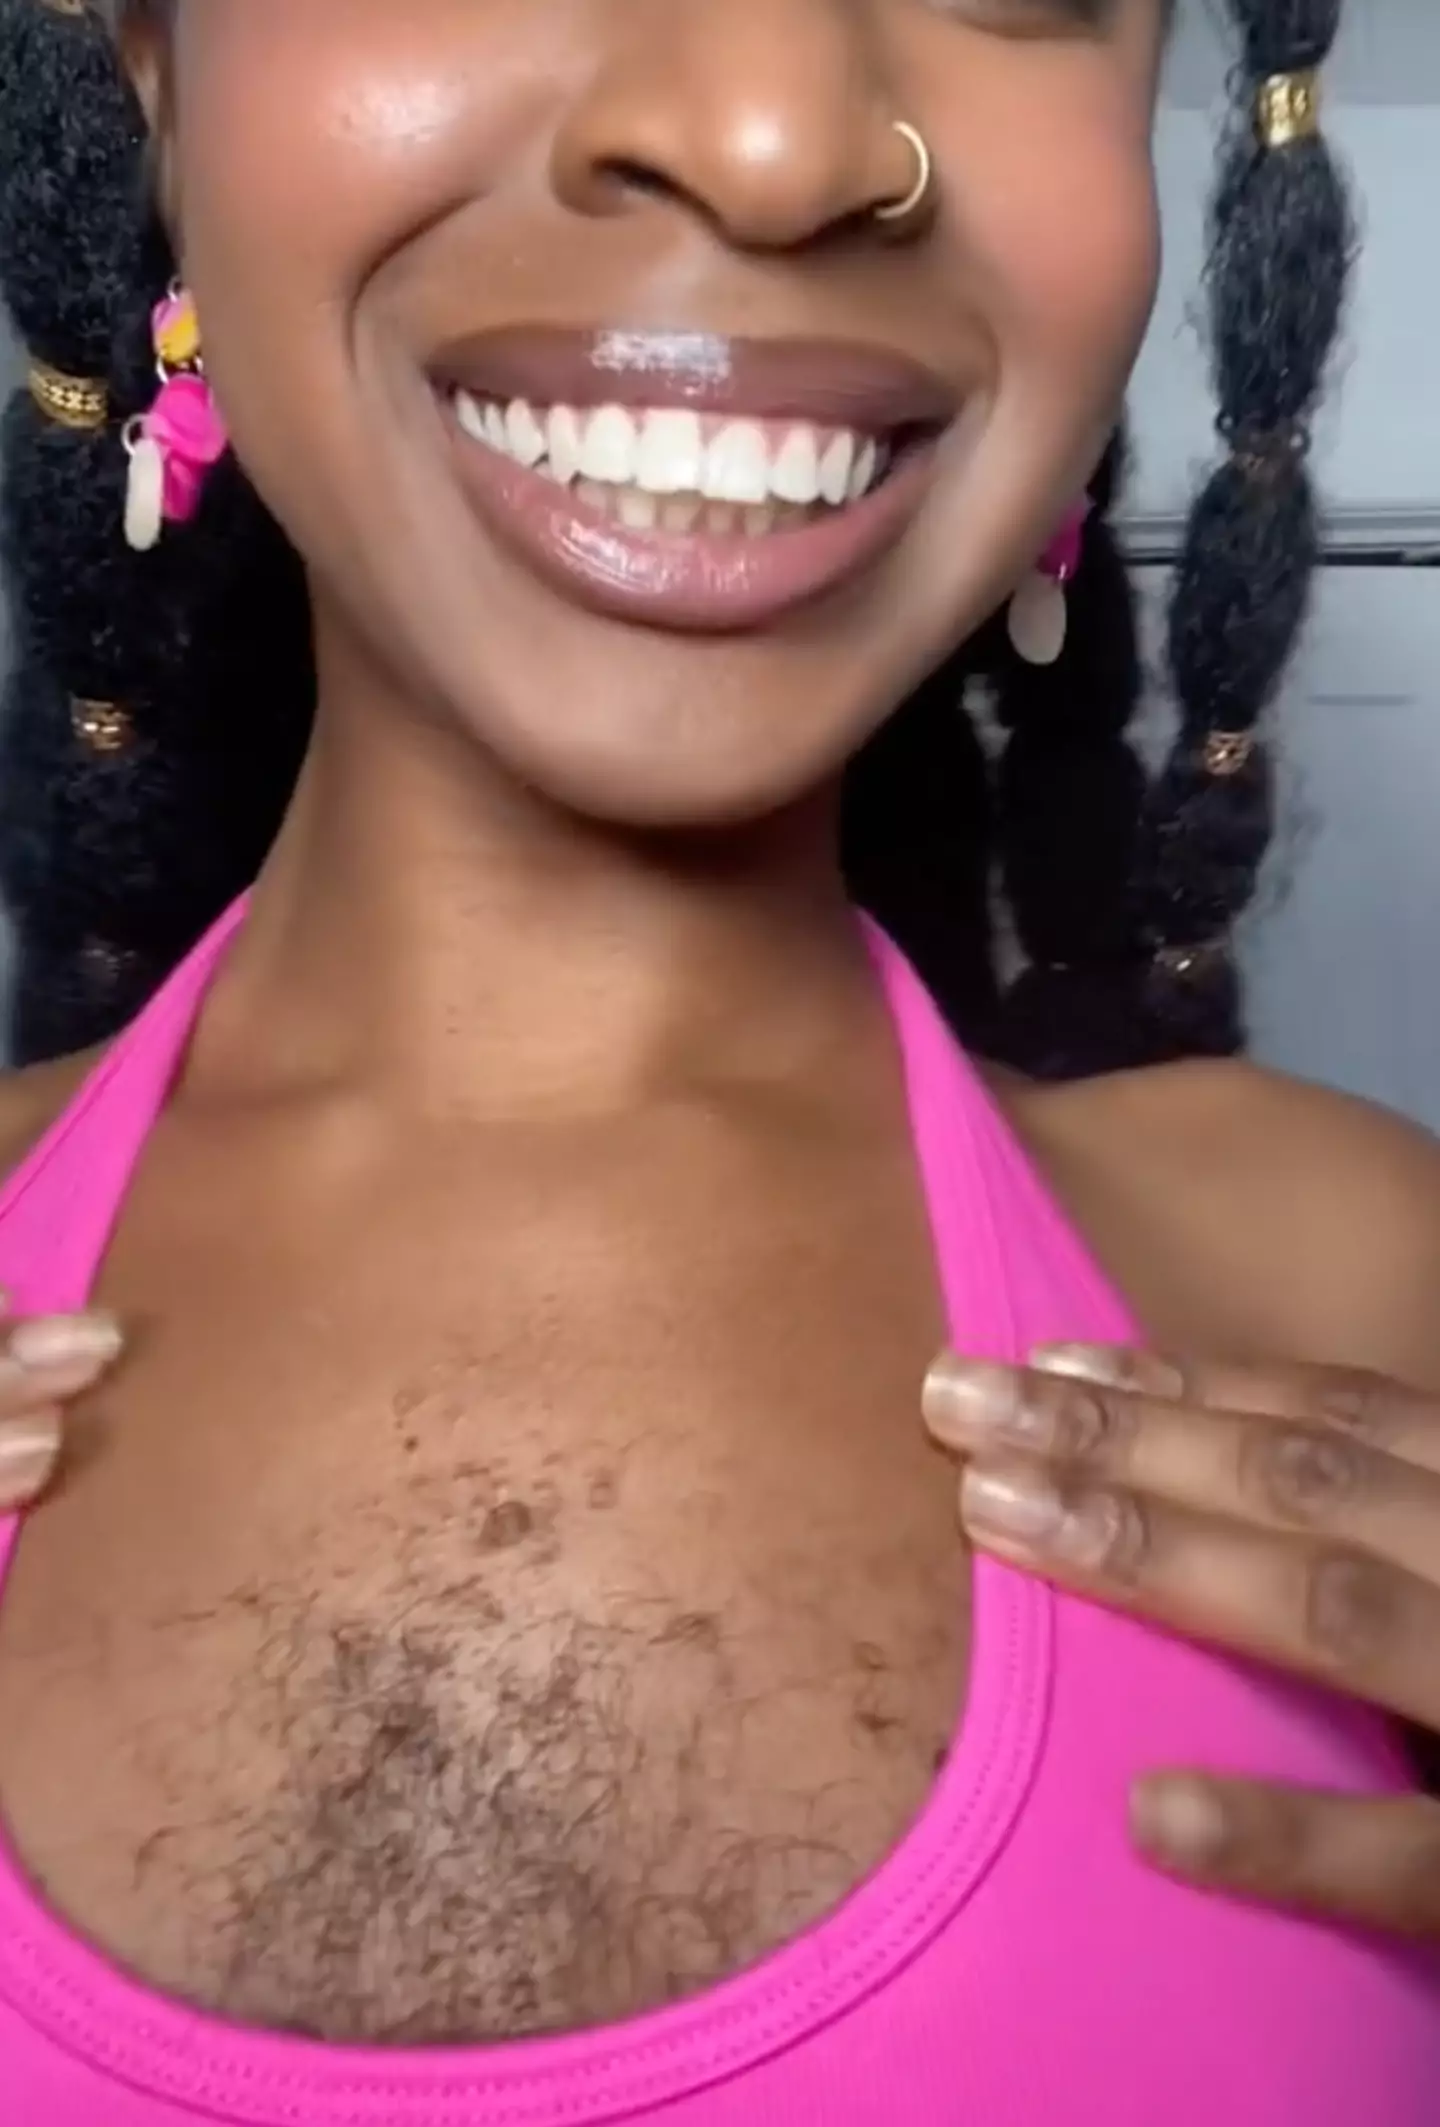 She started growing chest hair when she was 11.